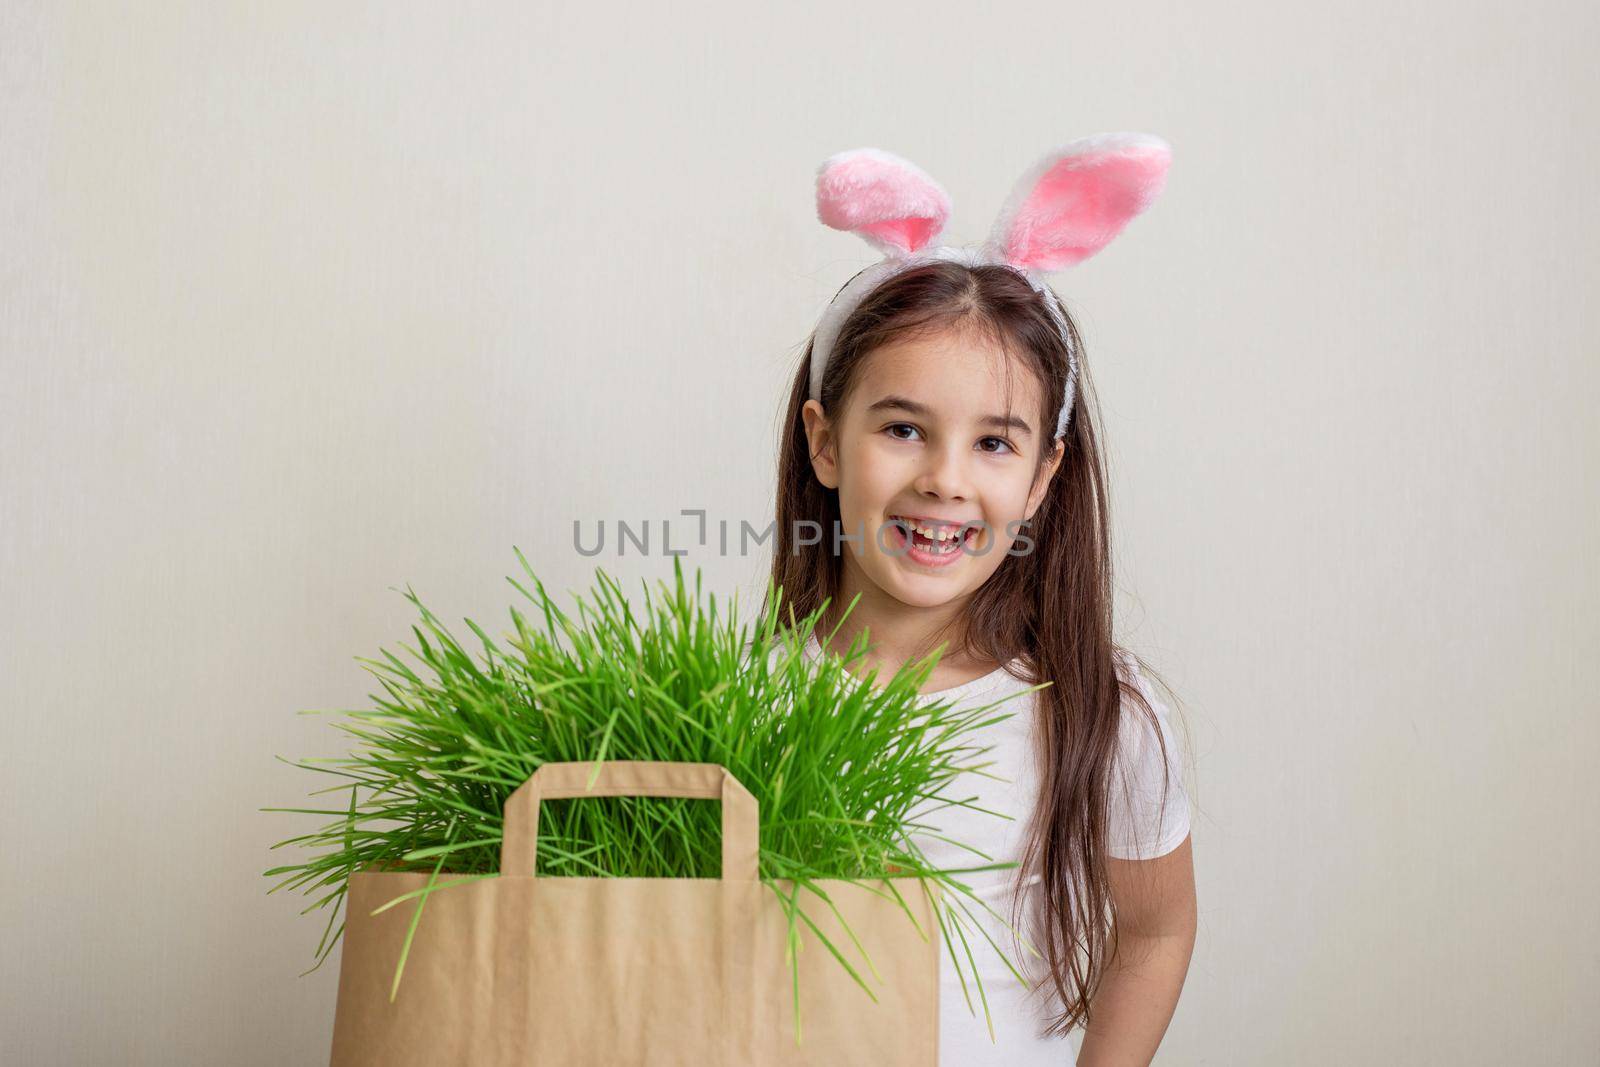 A cute little girl with pink rabbit ears stands next to a paper bag with grass, smiles. Copy space.